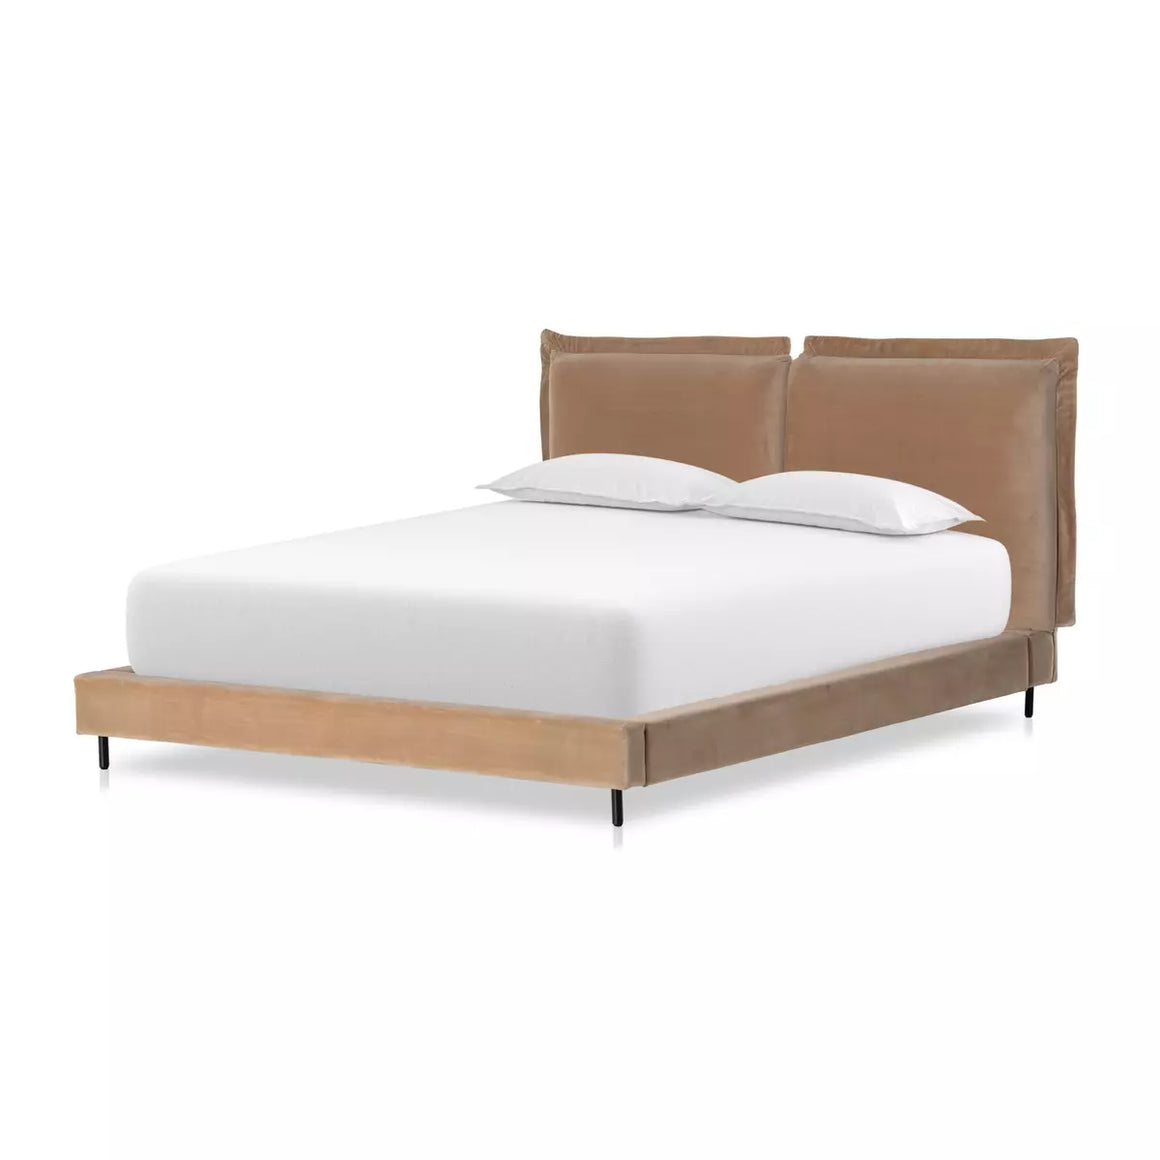 King Size Inwood Bed - Surrey Taupe